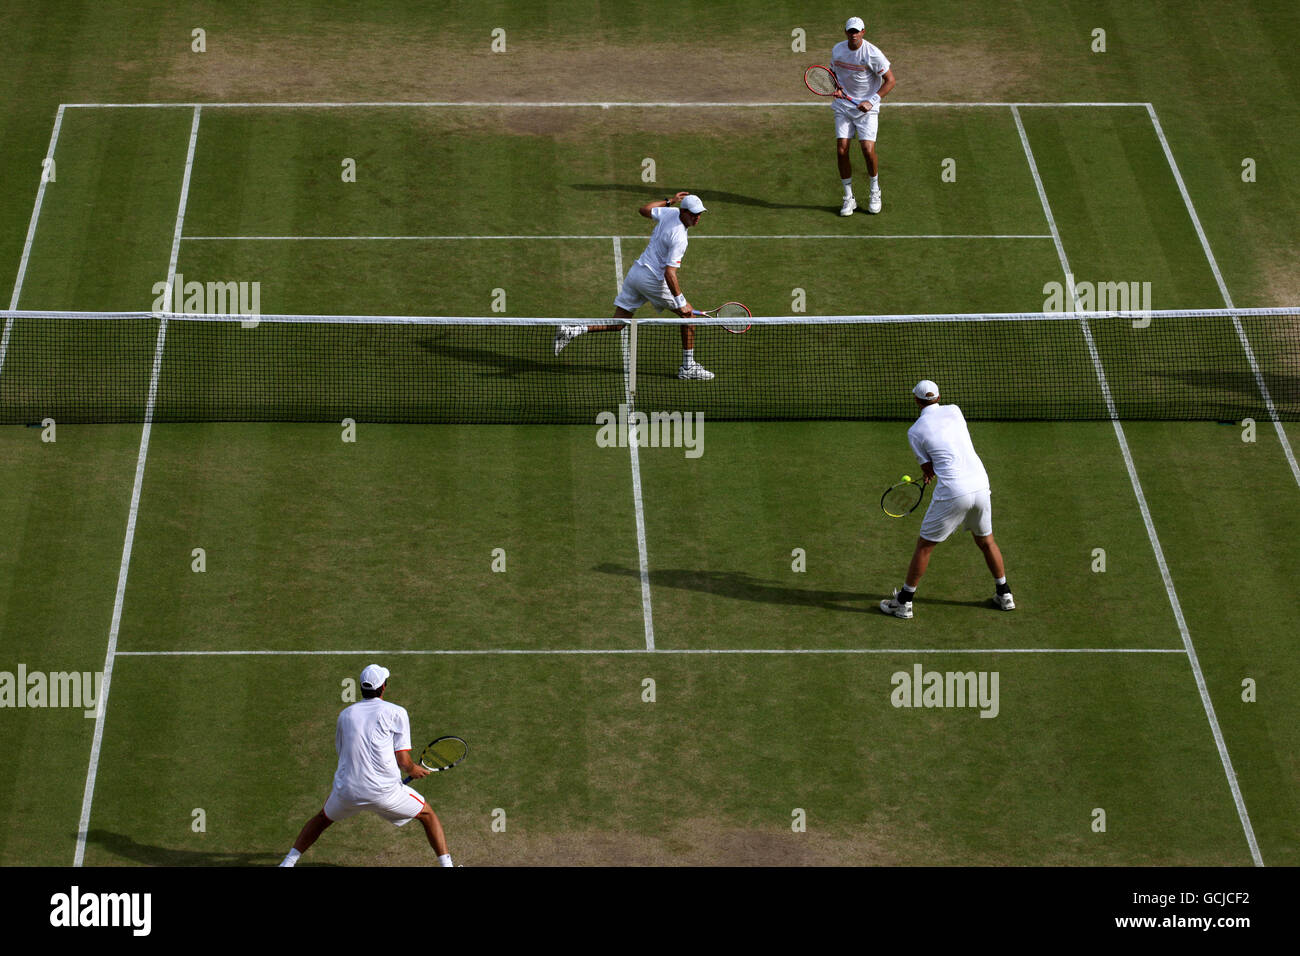 USA's Mike Bryan (top left) and Bob Bryan (top right) in action against Australia's Carsten Ball (bottom right) and Chris Guccione (bottom left) Stock Photo